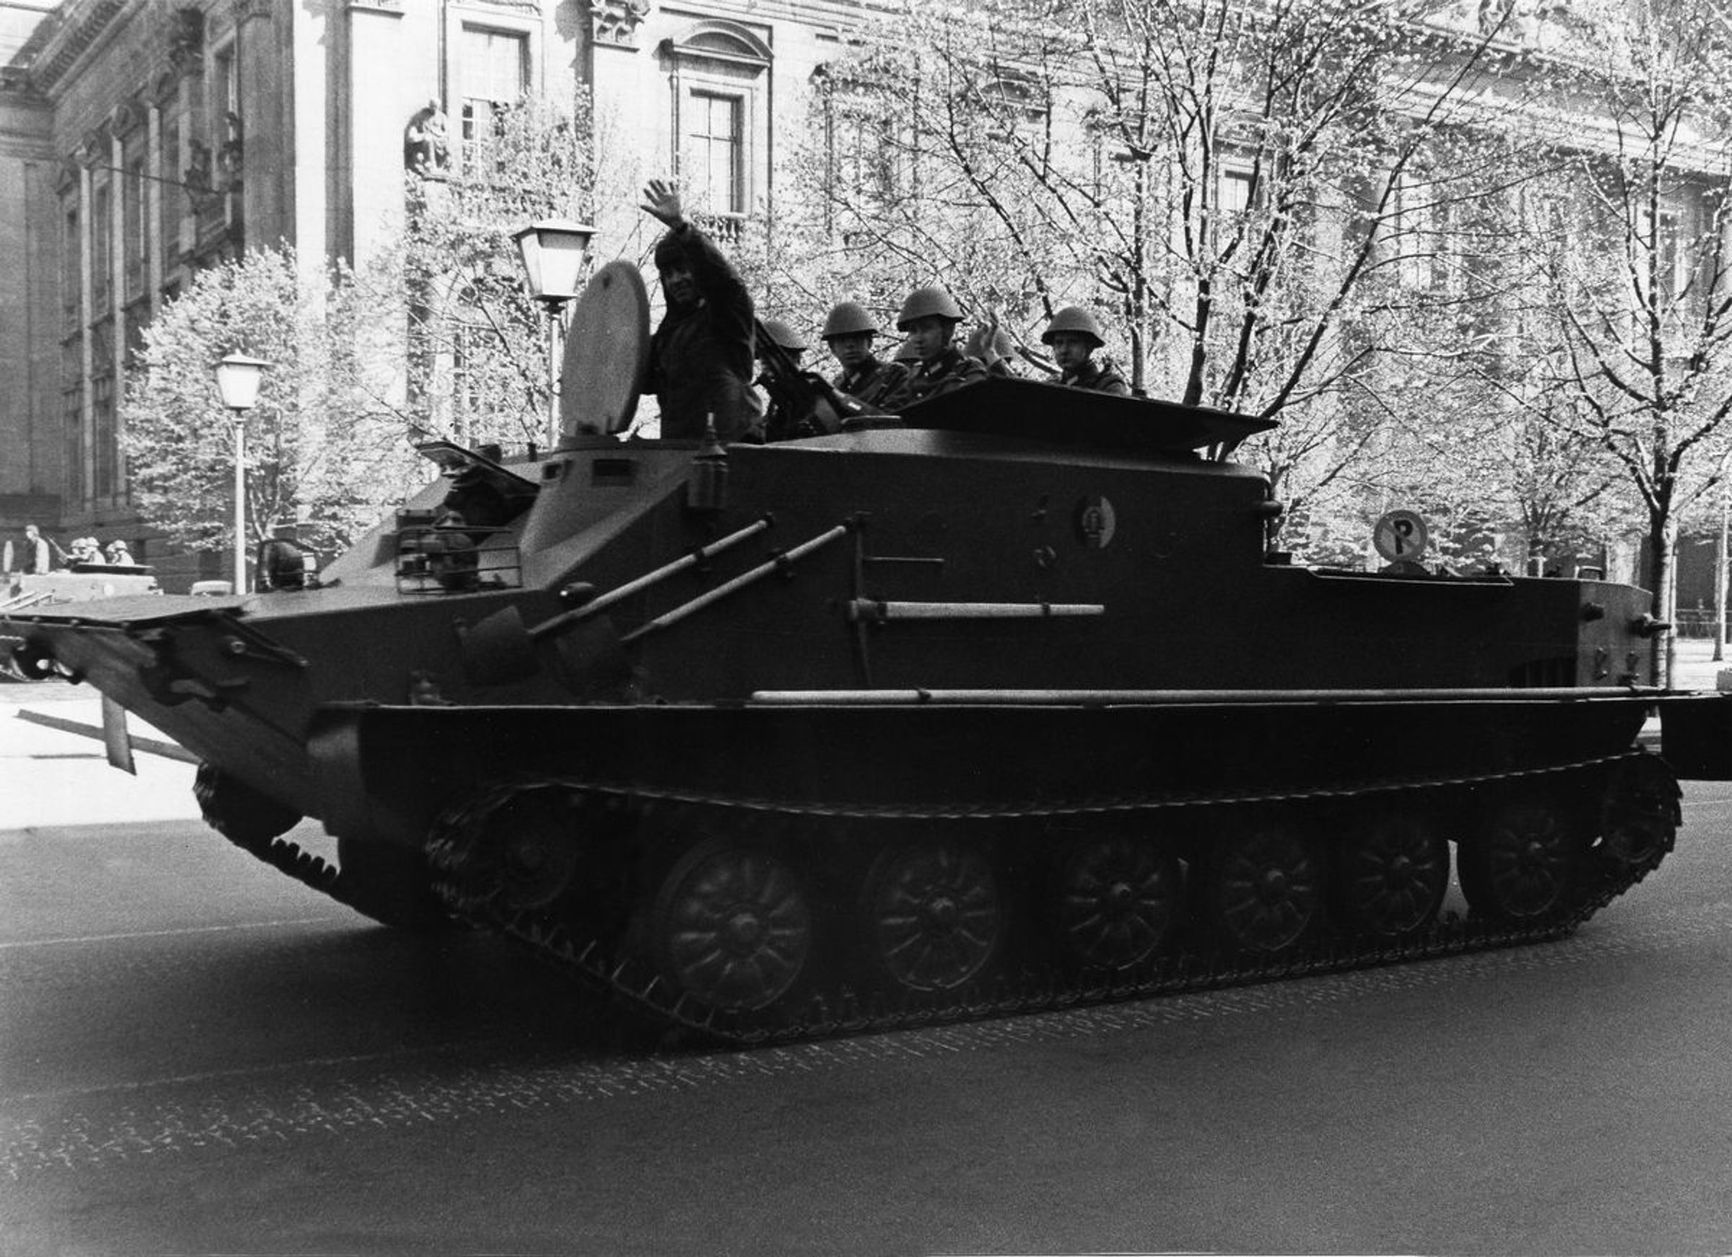 An APC-50 of the GDR National People's Army 